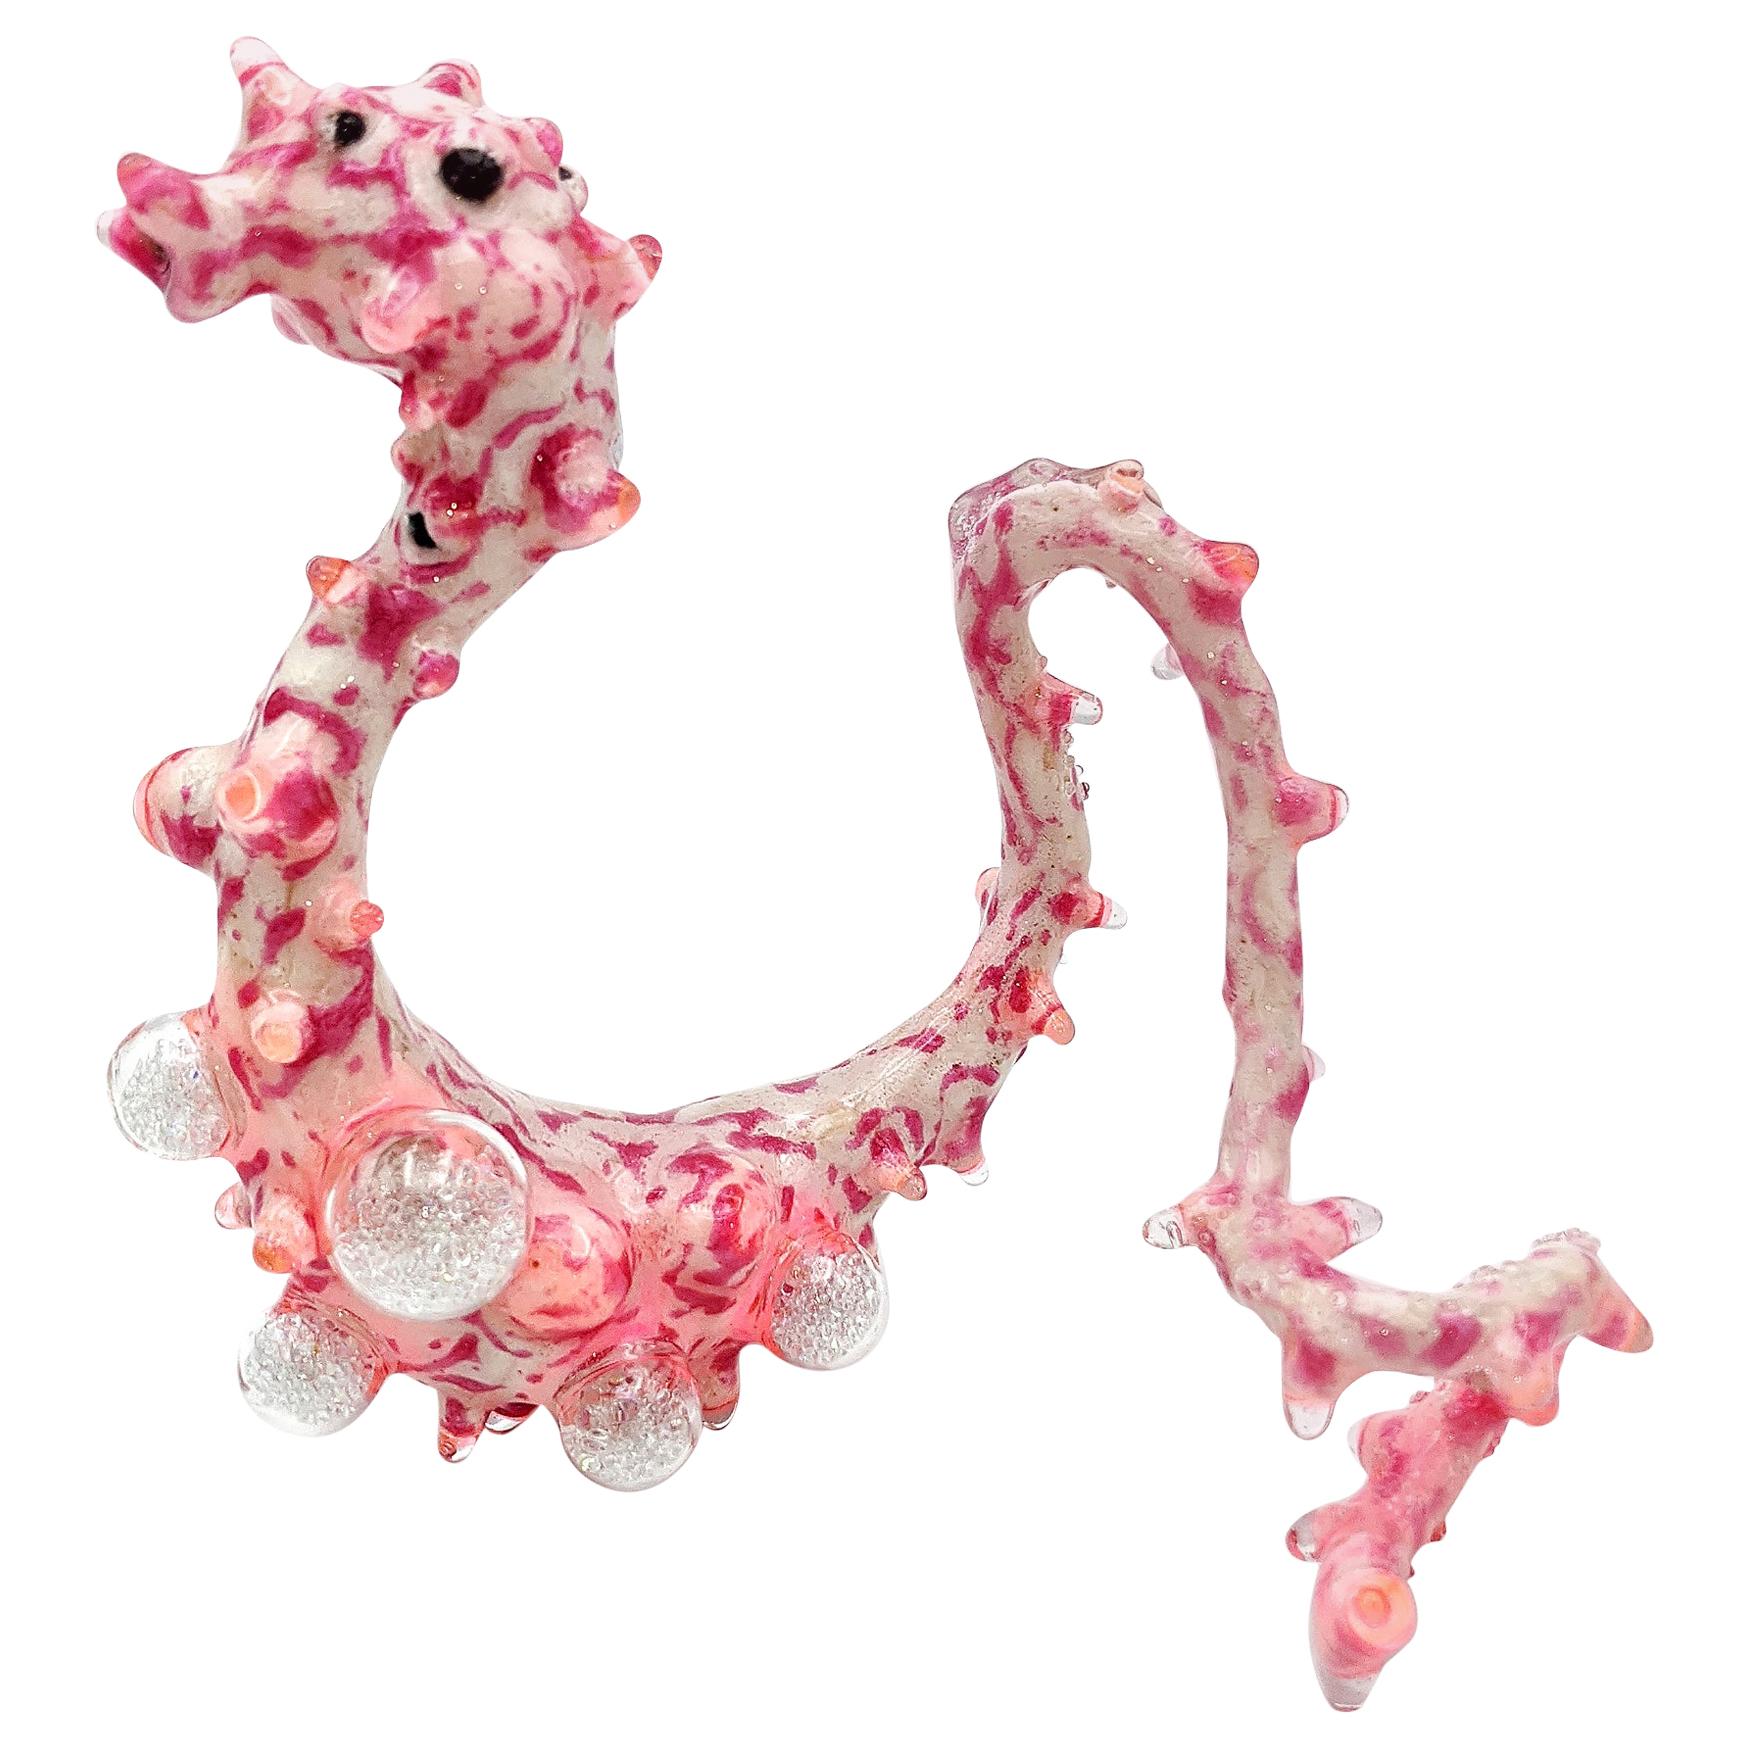 Carolina Gomes Pygmy Seahorse Bracelet in Pigment and Mixed Materials For Sale